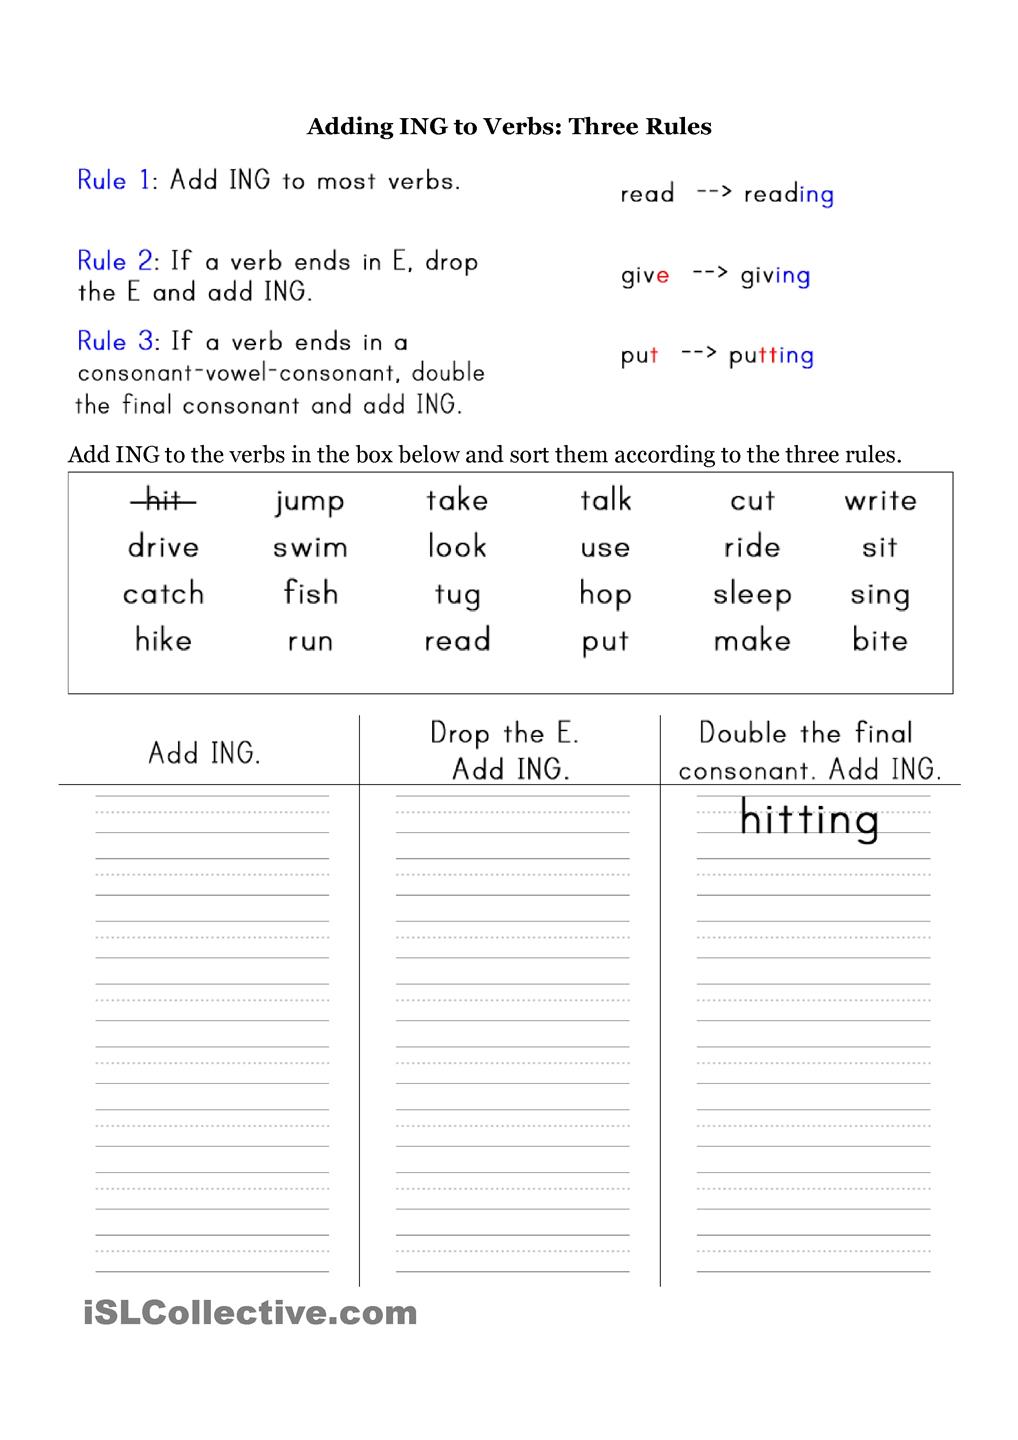 Add Ing To The Verbs